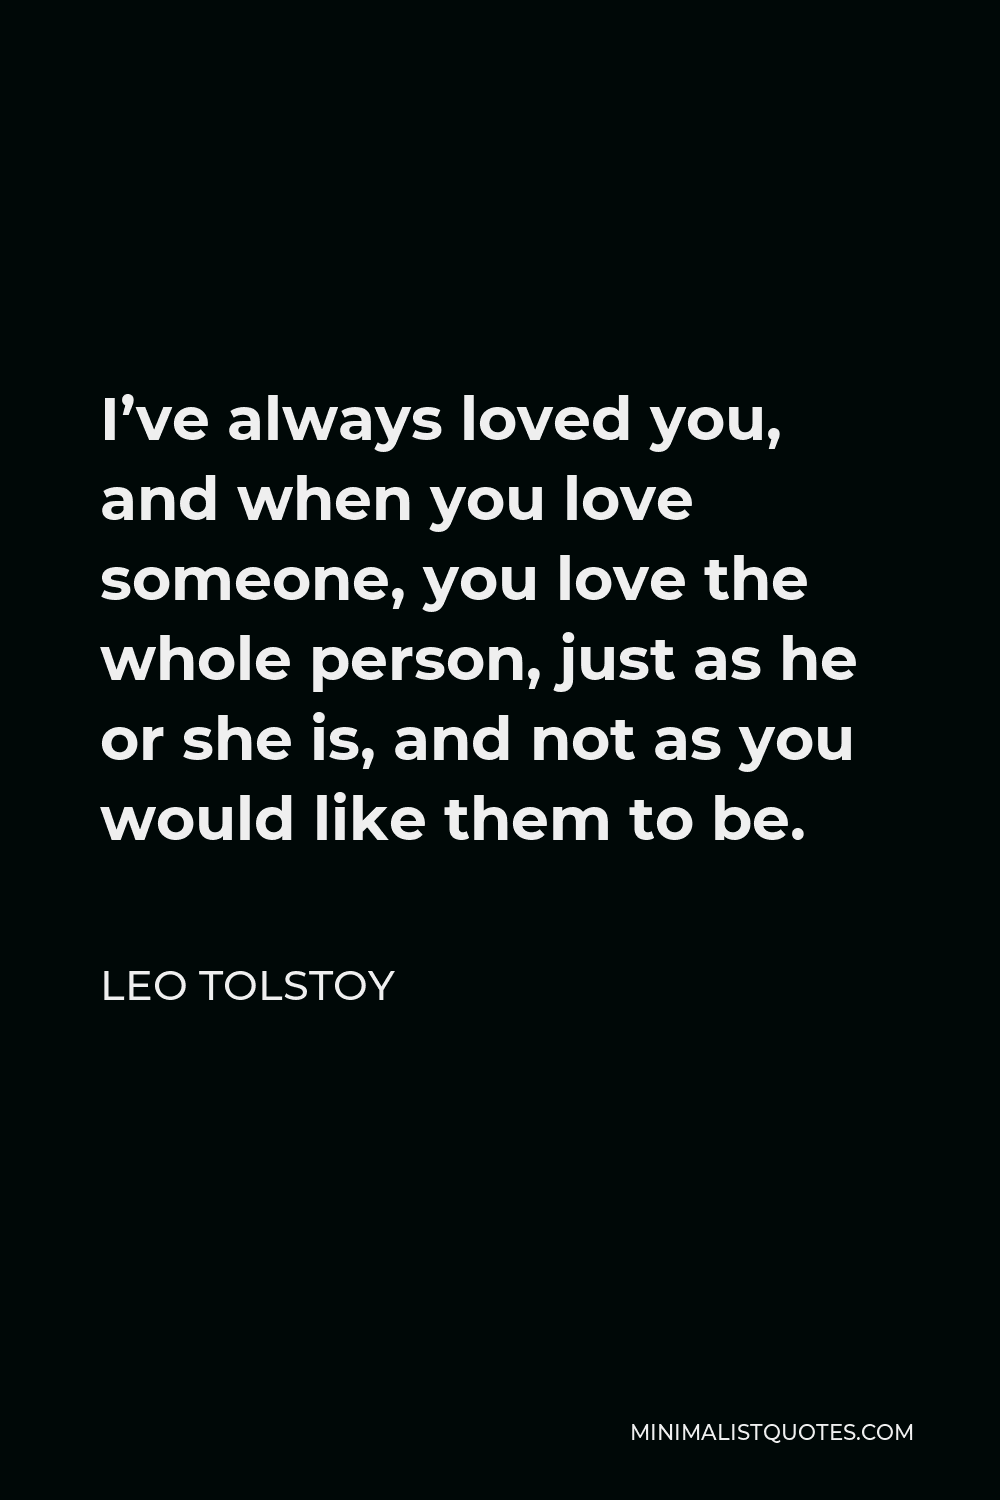 Leo Tolstoy Quote - I’ve always loved you, and when you love someone, you love the whole person, just as he or she is, and not as you would like them to be.